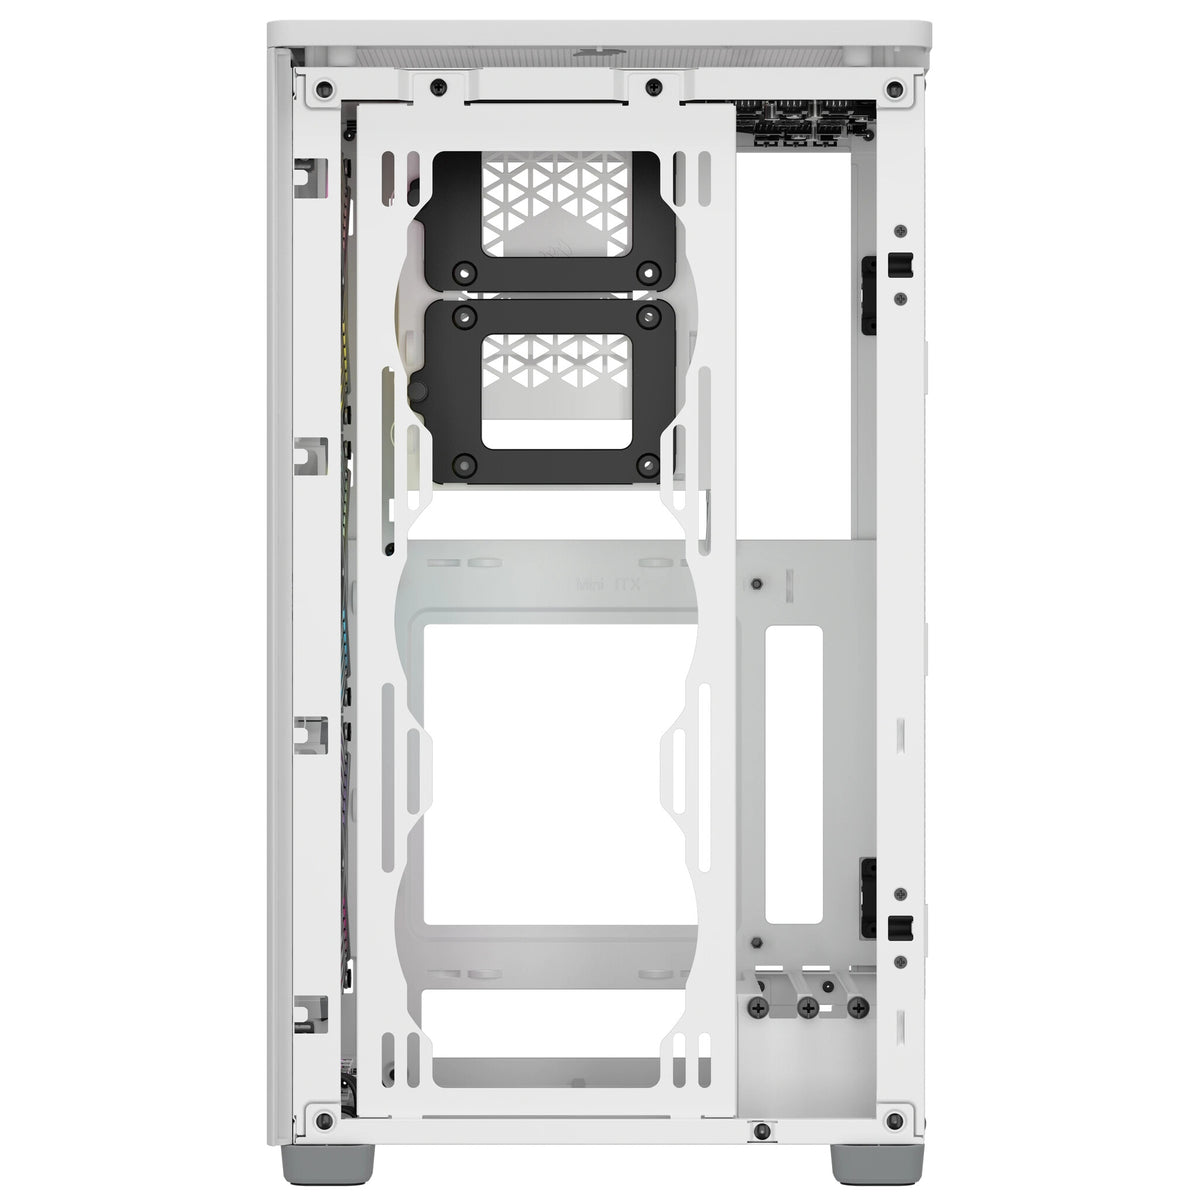 Corsair 2000D RGB Small Form Factor Case in White